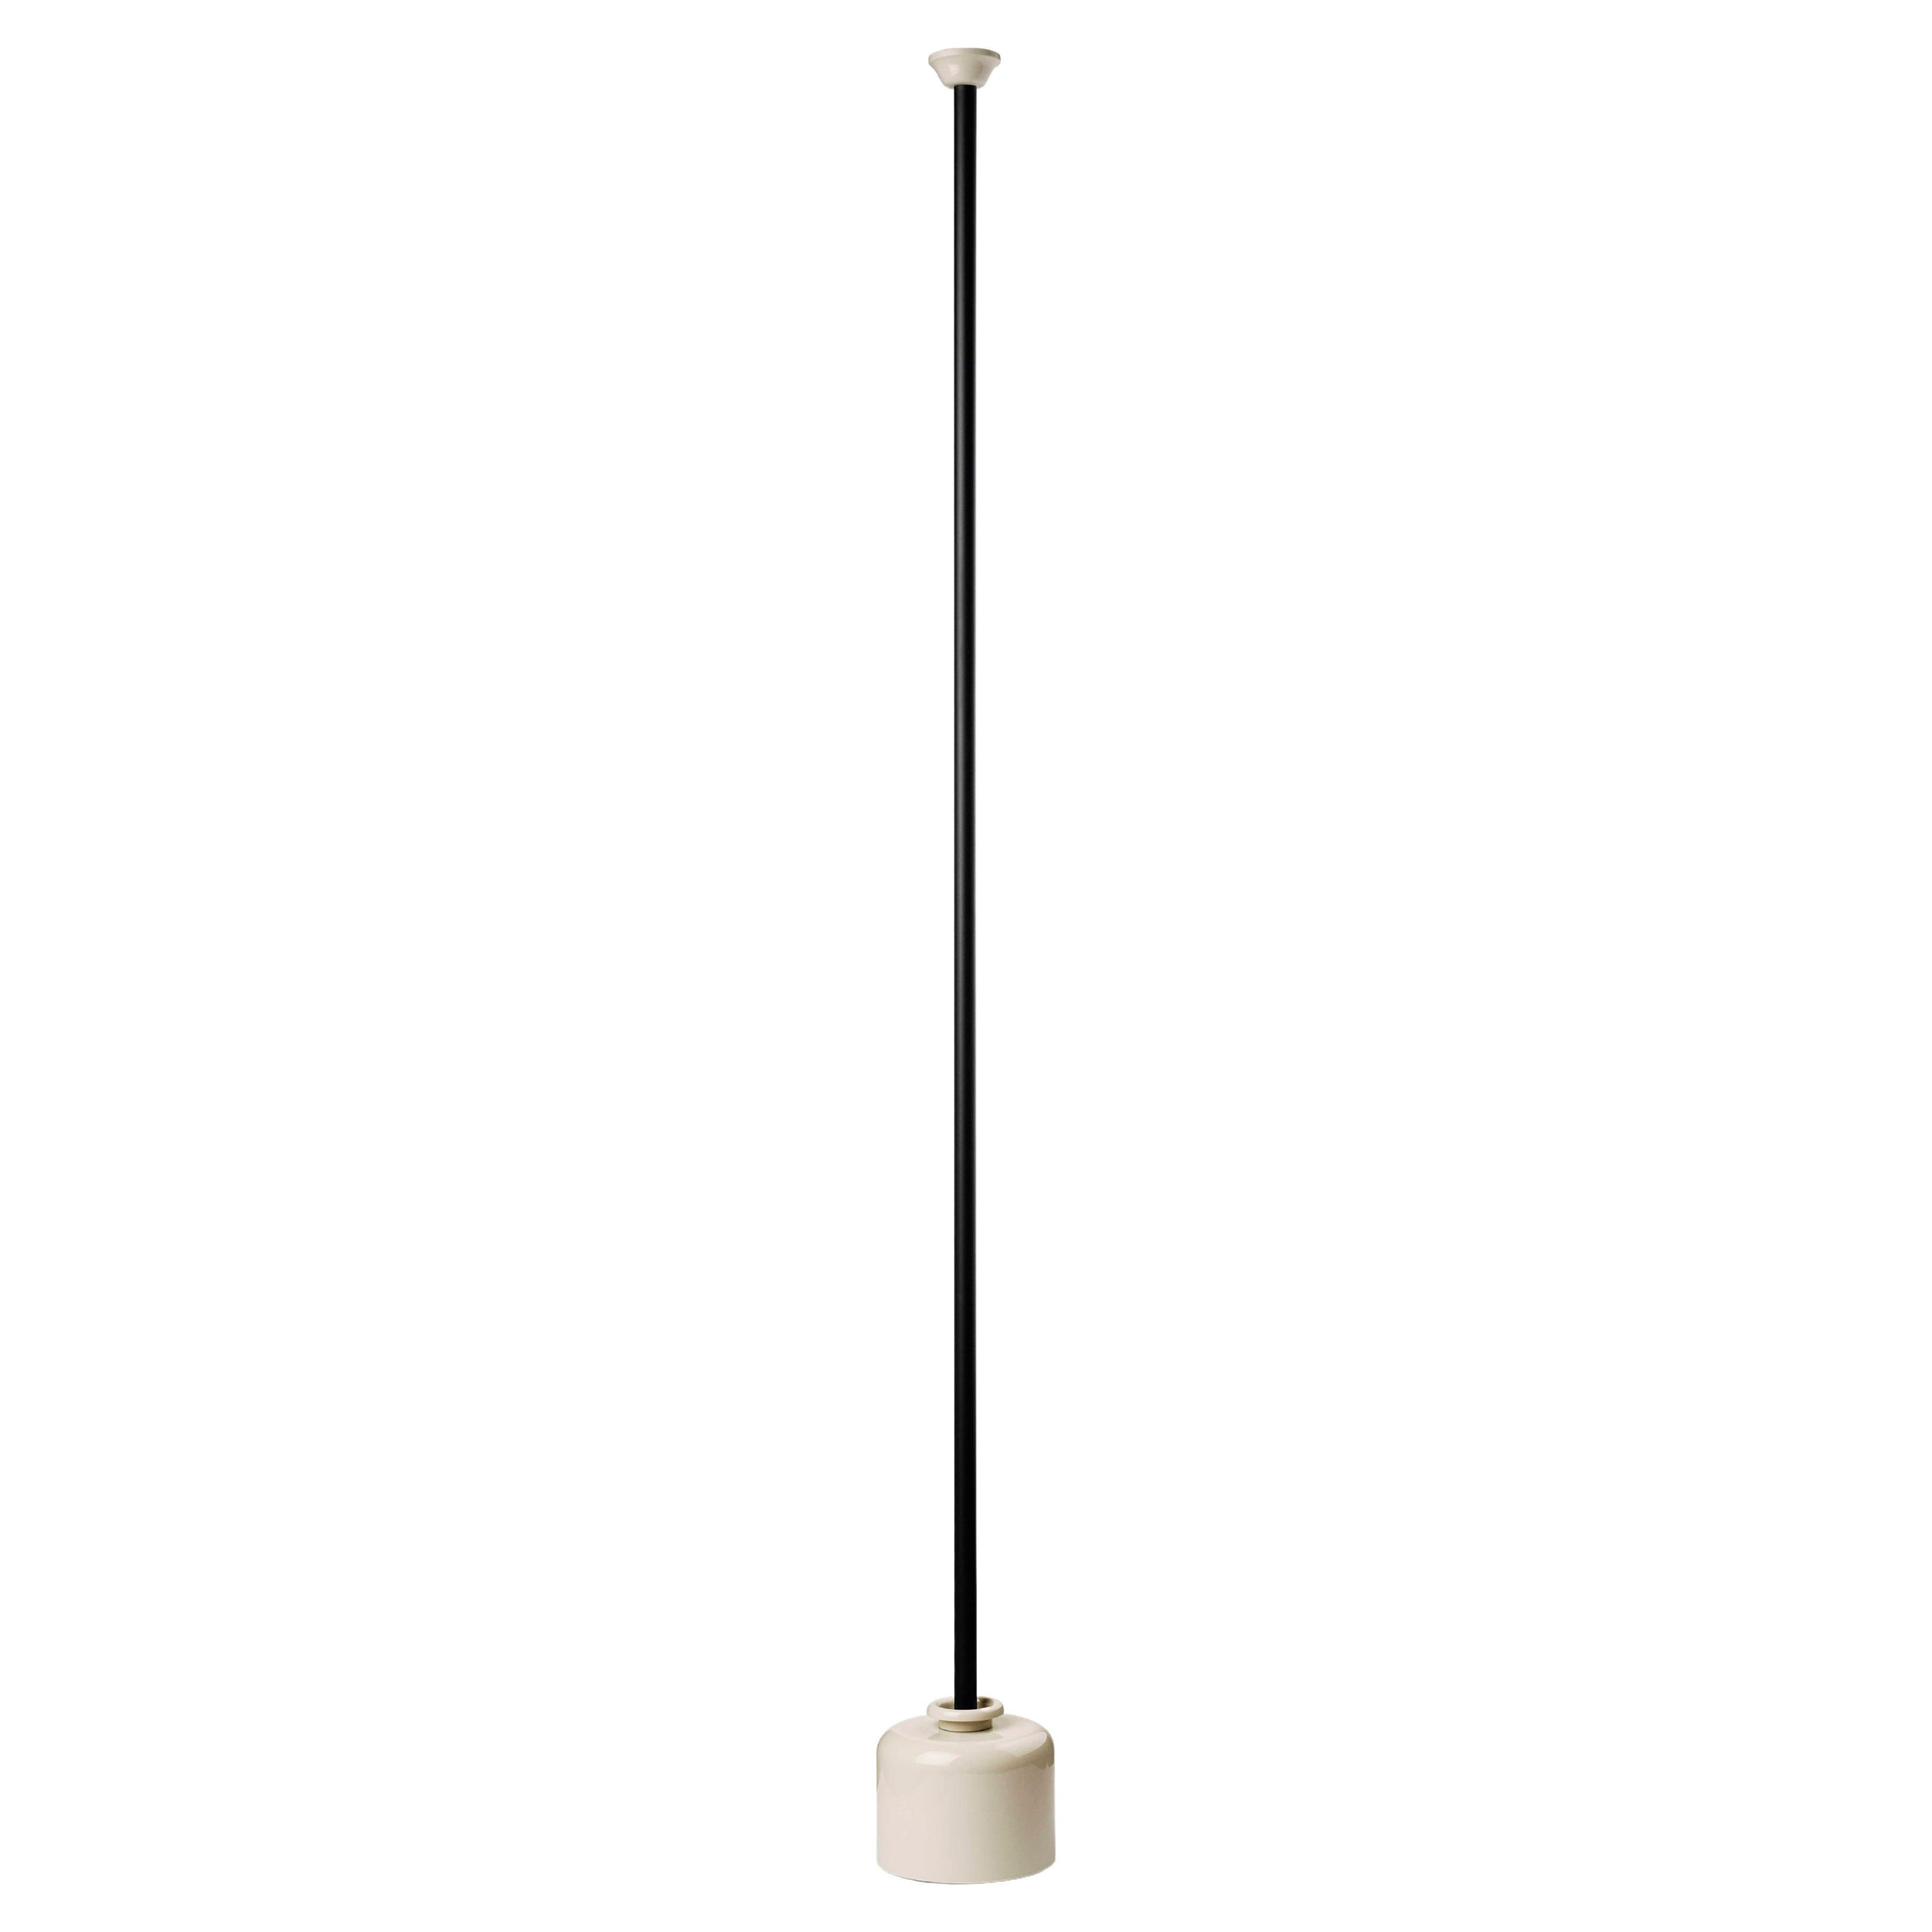 Large Gino Sarfatti Model 1095 Floor Lamp for Astep For Sale